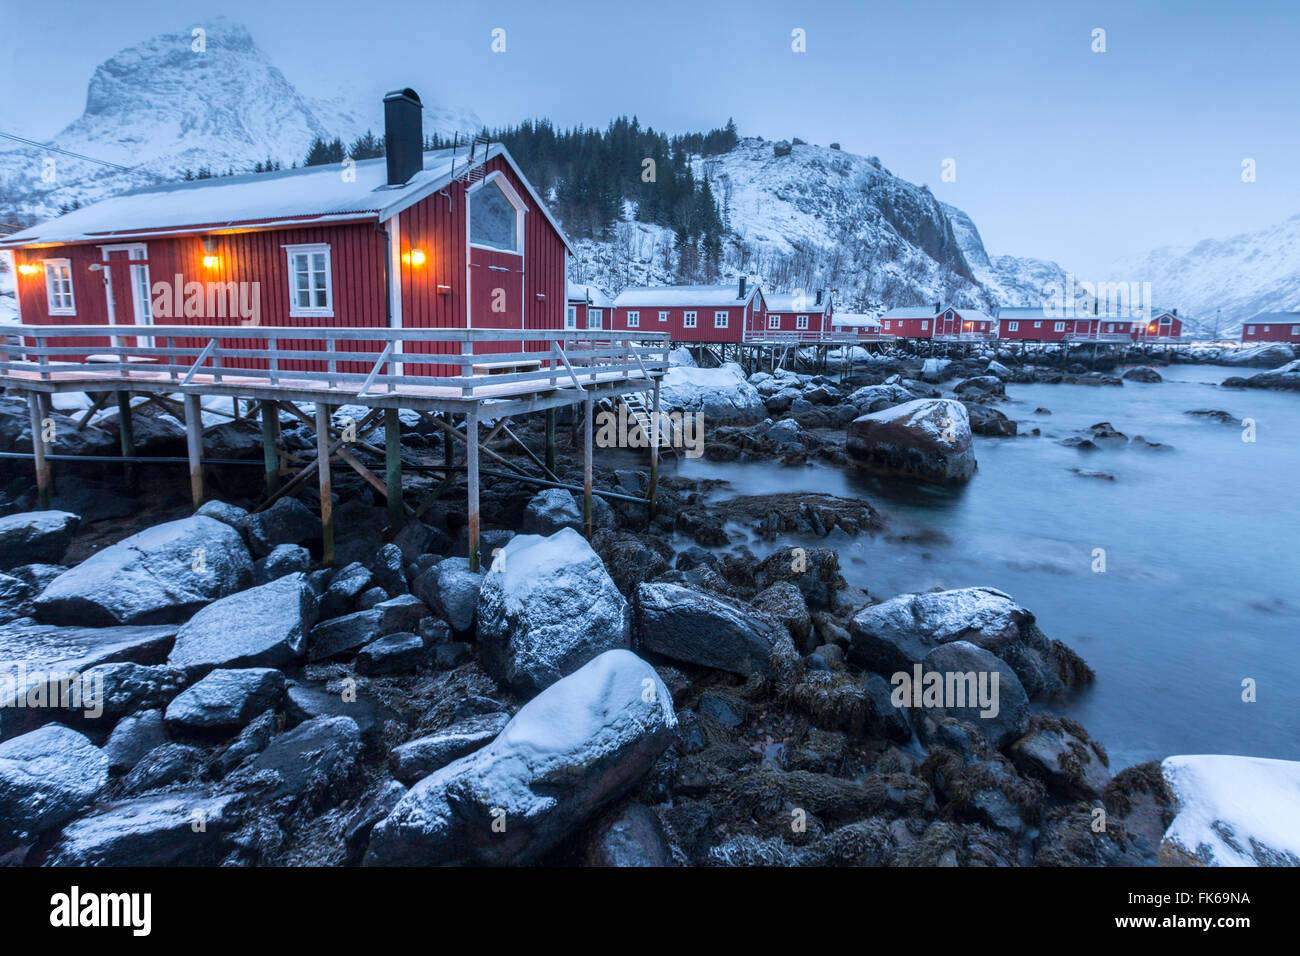 Typical fishermen houses called rorbu in the snowy landscape at dusk, Nusfjord, Nordland County, Lofoten Islands, Norway Stock Photo